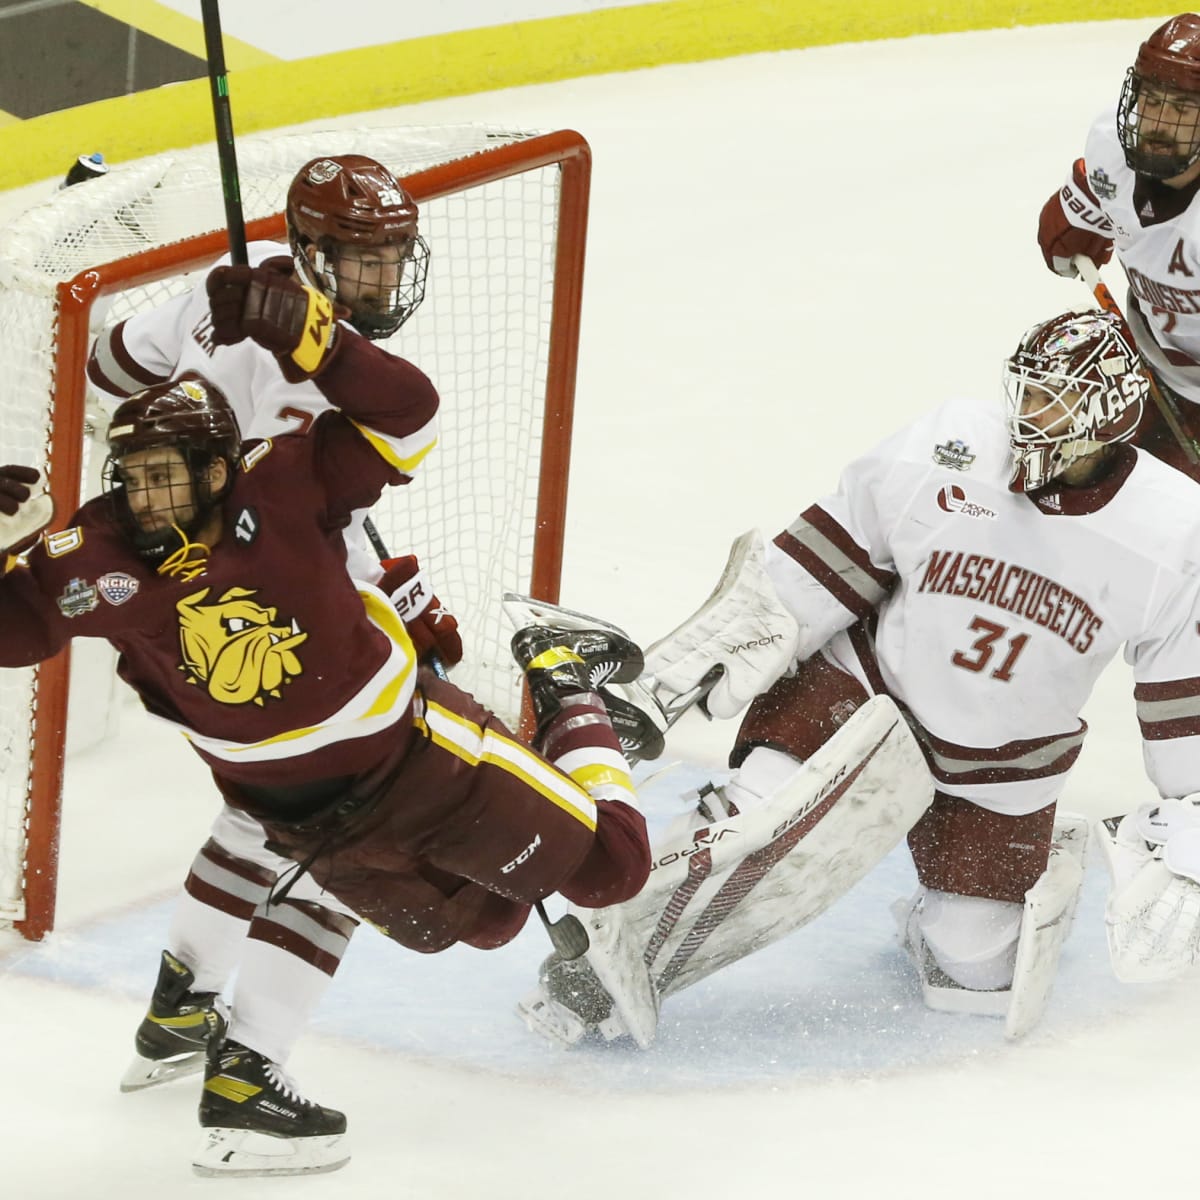 Watch Minnesota-Duluth at St Cloud State Stream college hockey live - How to Watch and Stream Major League and College Sports